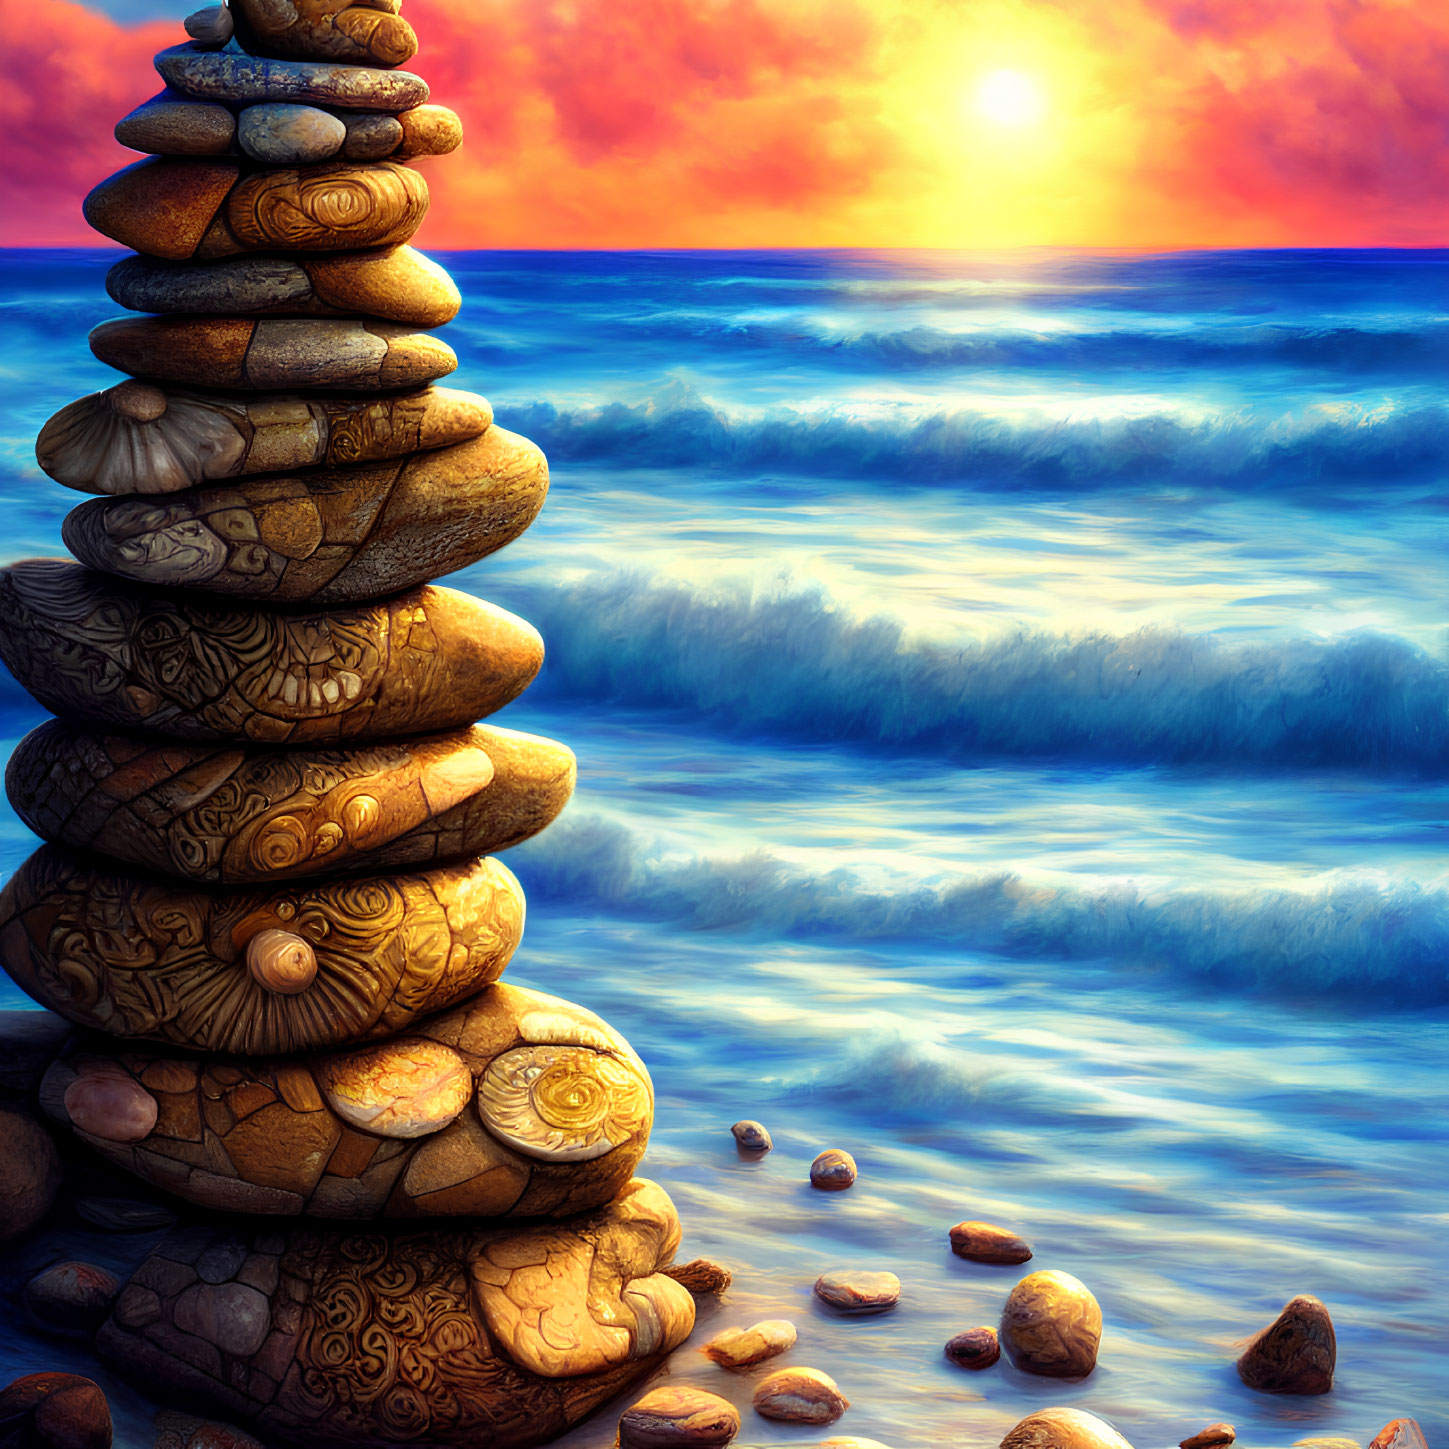 Intricately patterned rock stack against vibrant sunset and ocean waves